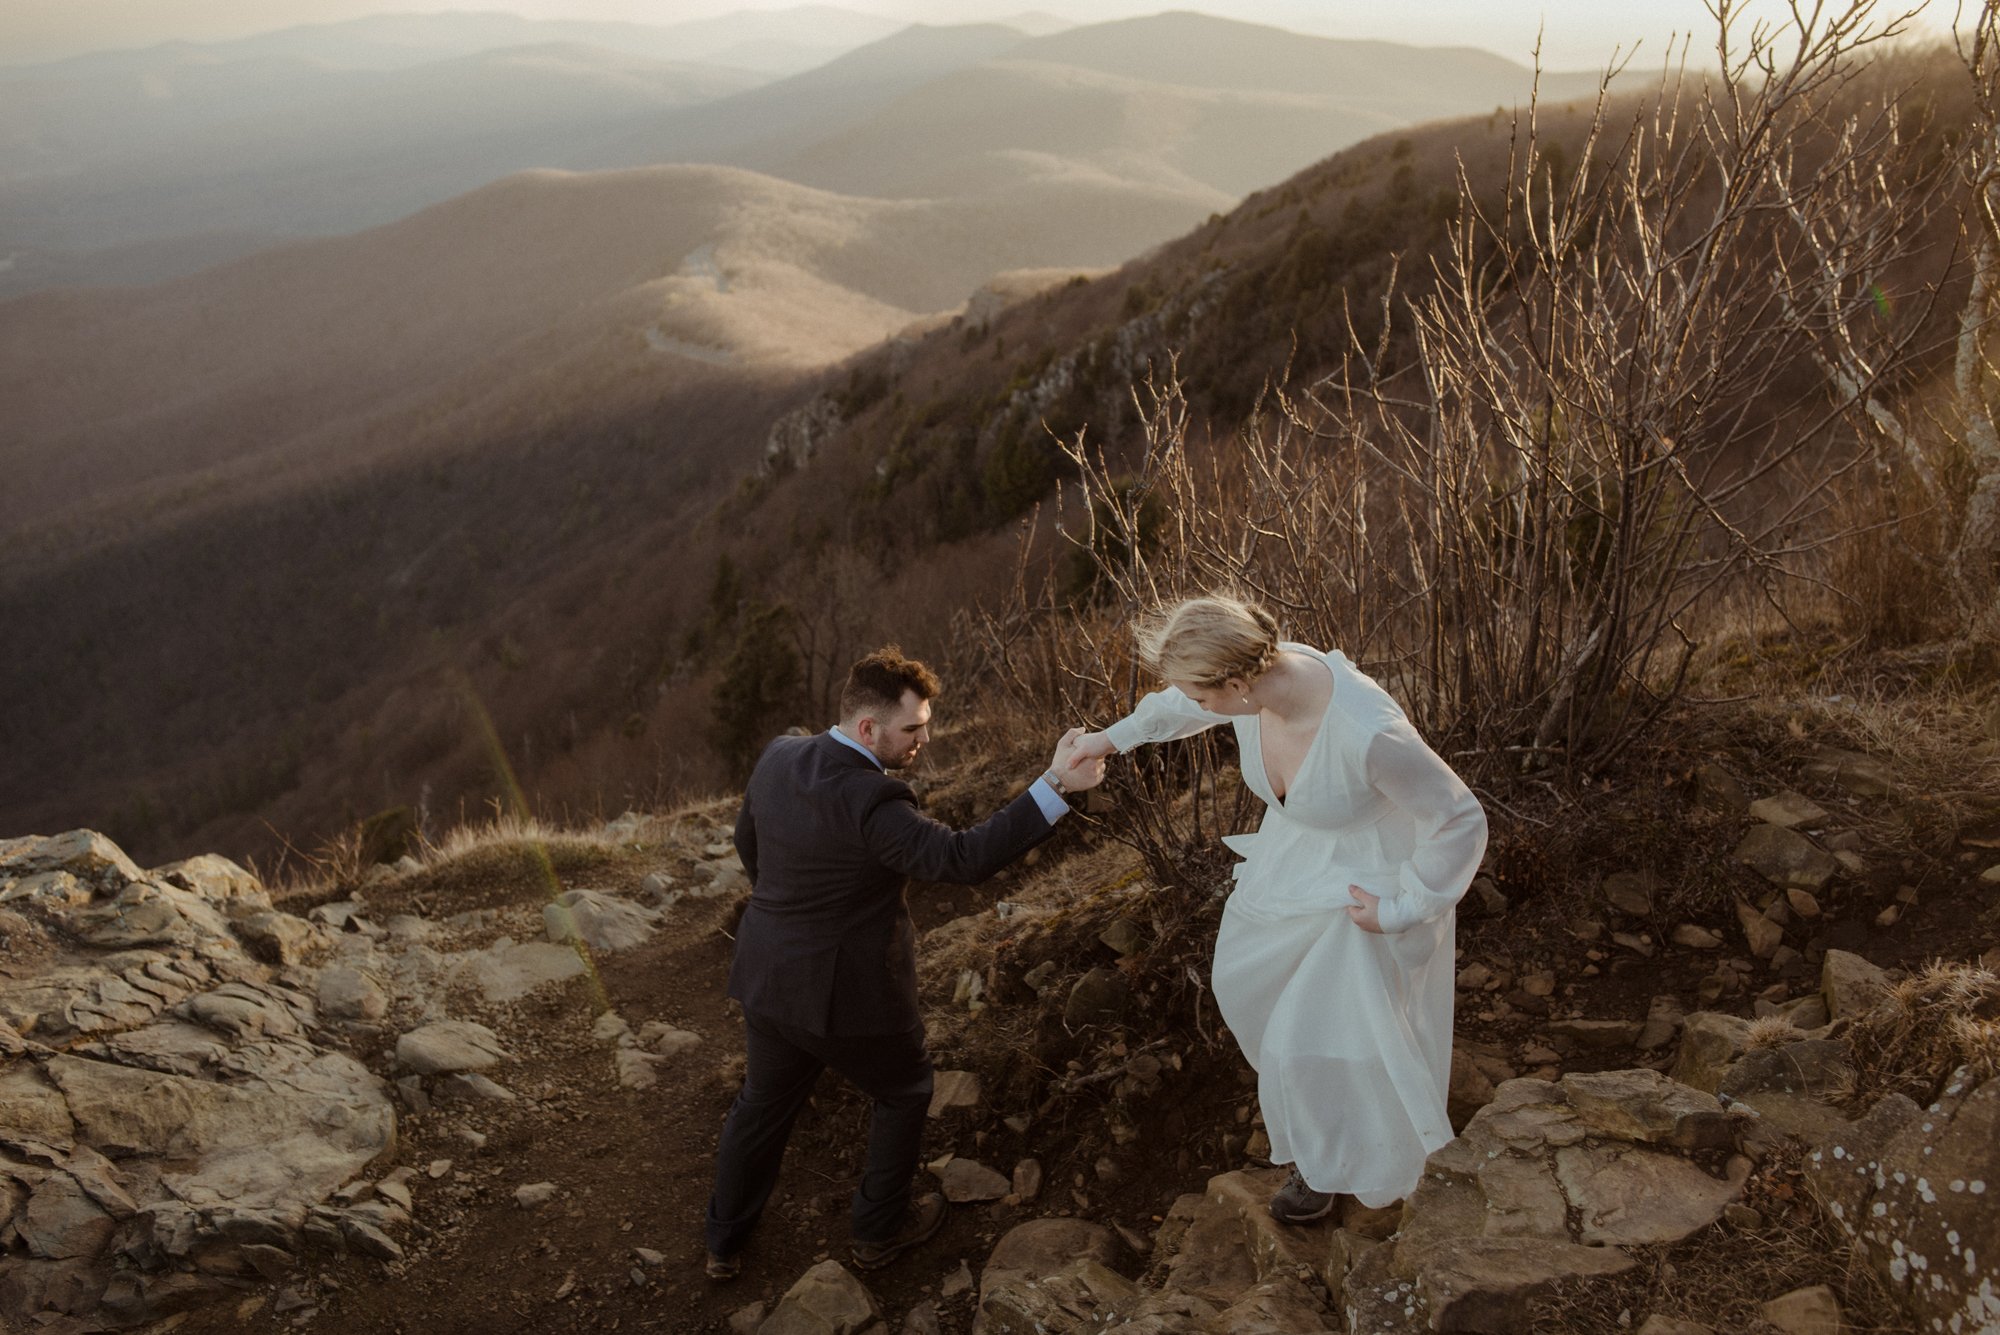 March Sunrise Hiking Elopement Ceremony with Friends and Family in Shenandoah National Park_92.jpg